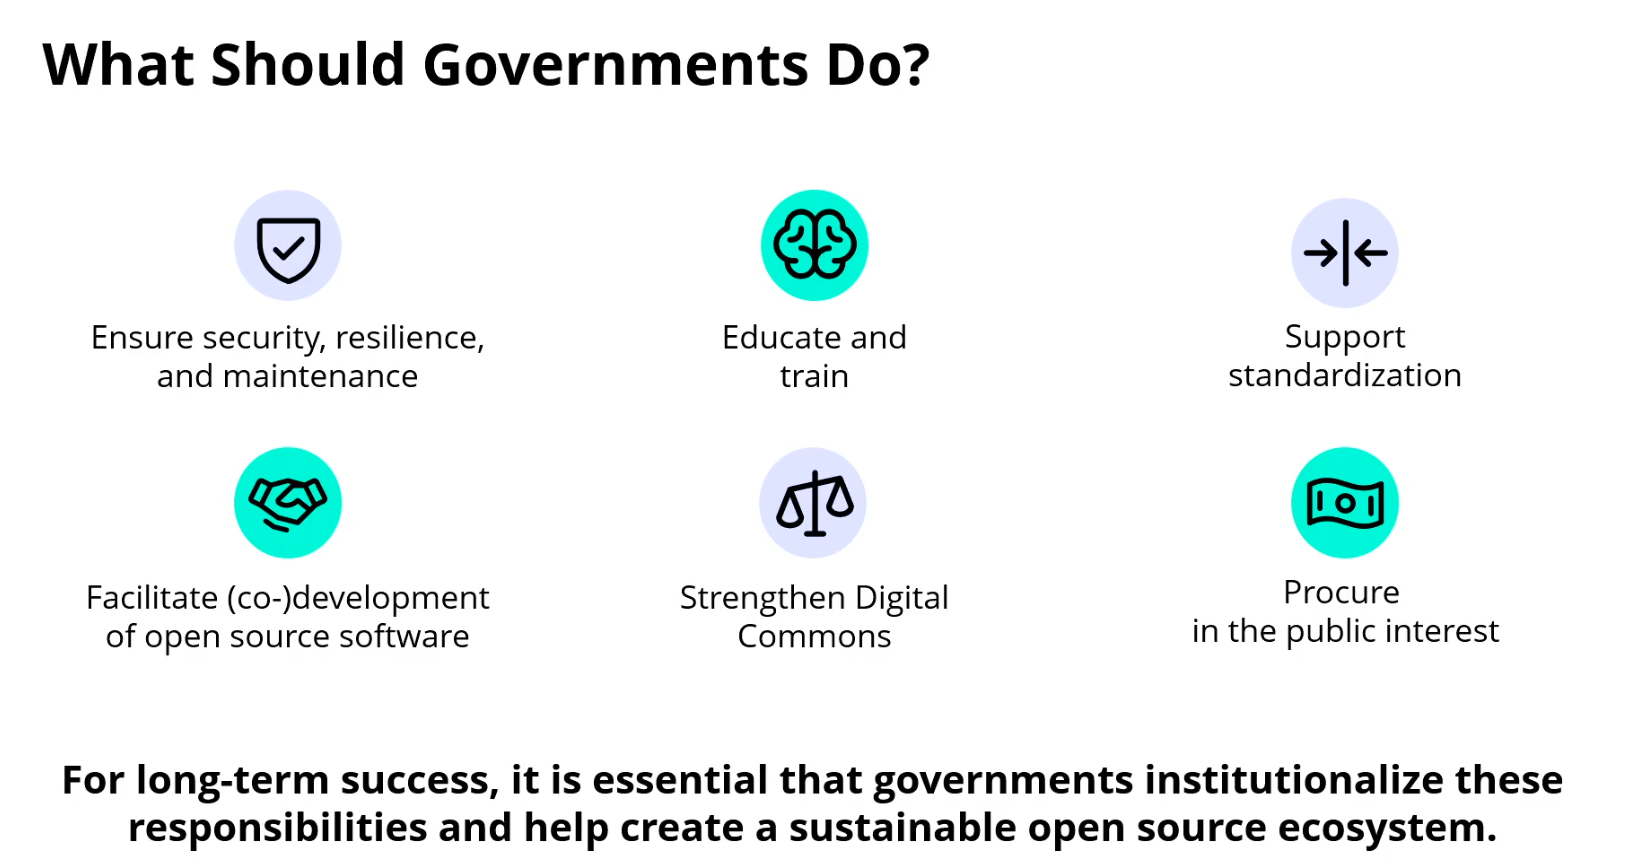 What should governments do? Ensure security, resilience and maintenance. Educate and train. Support standardization. Facilitate (co-)development of open source software. Strengthen Digital Commons. Procure in the public interest.